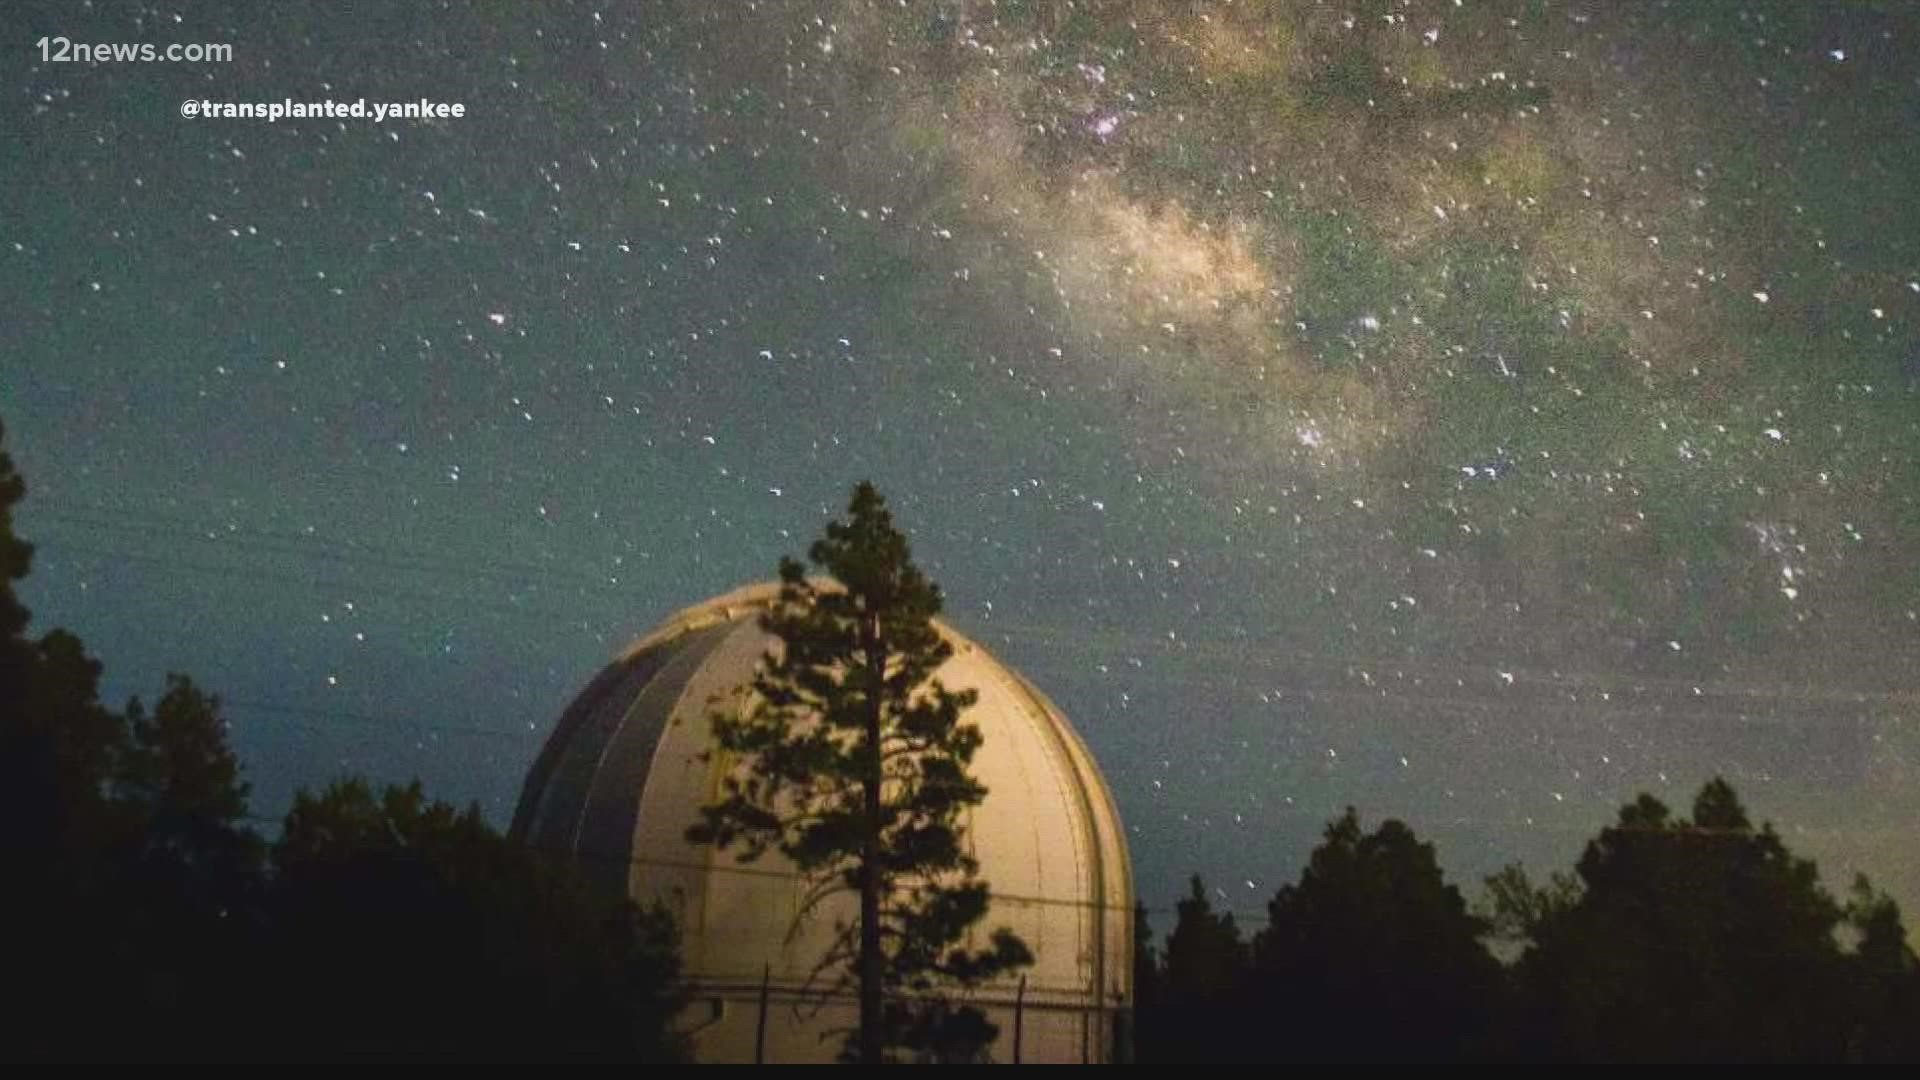 Stargazers will soon be able to search the skies over Flagstaff once again when the Lowell Observatory reopens to the public Nov. 15.